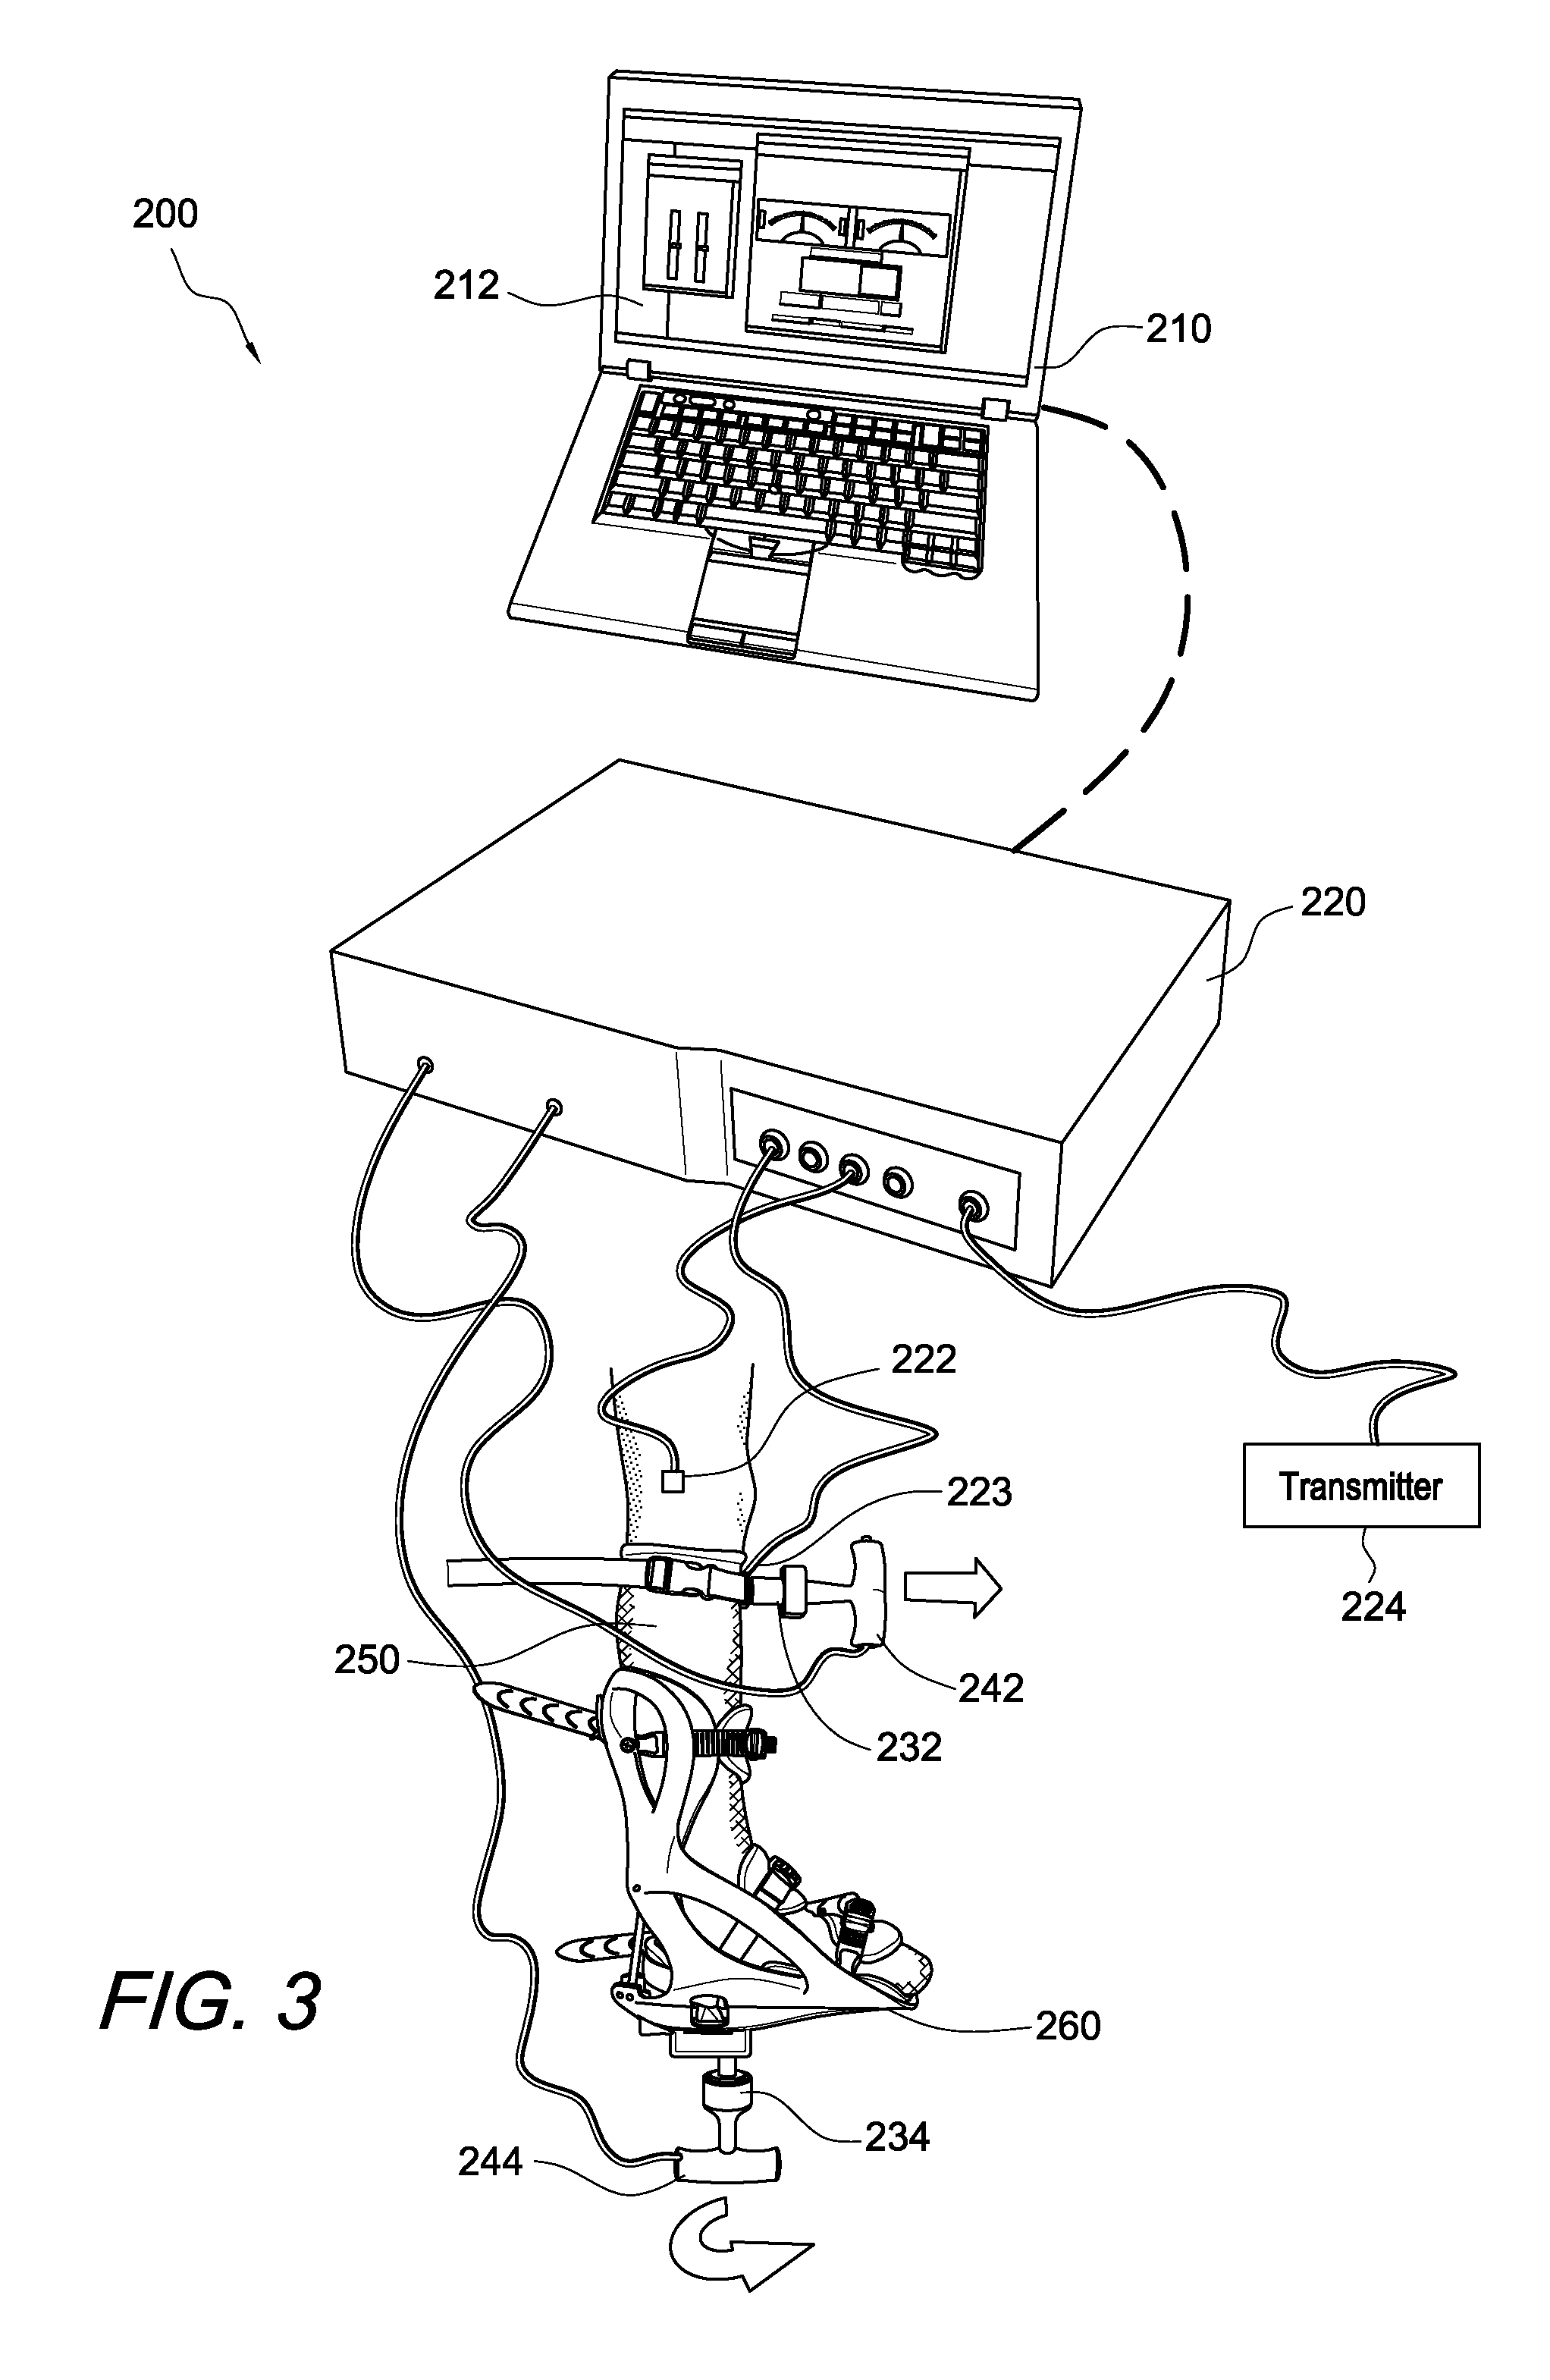 Knee ligament testing device for measuring drawer and rotational laxity